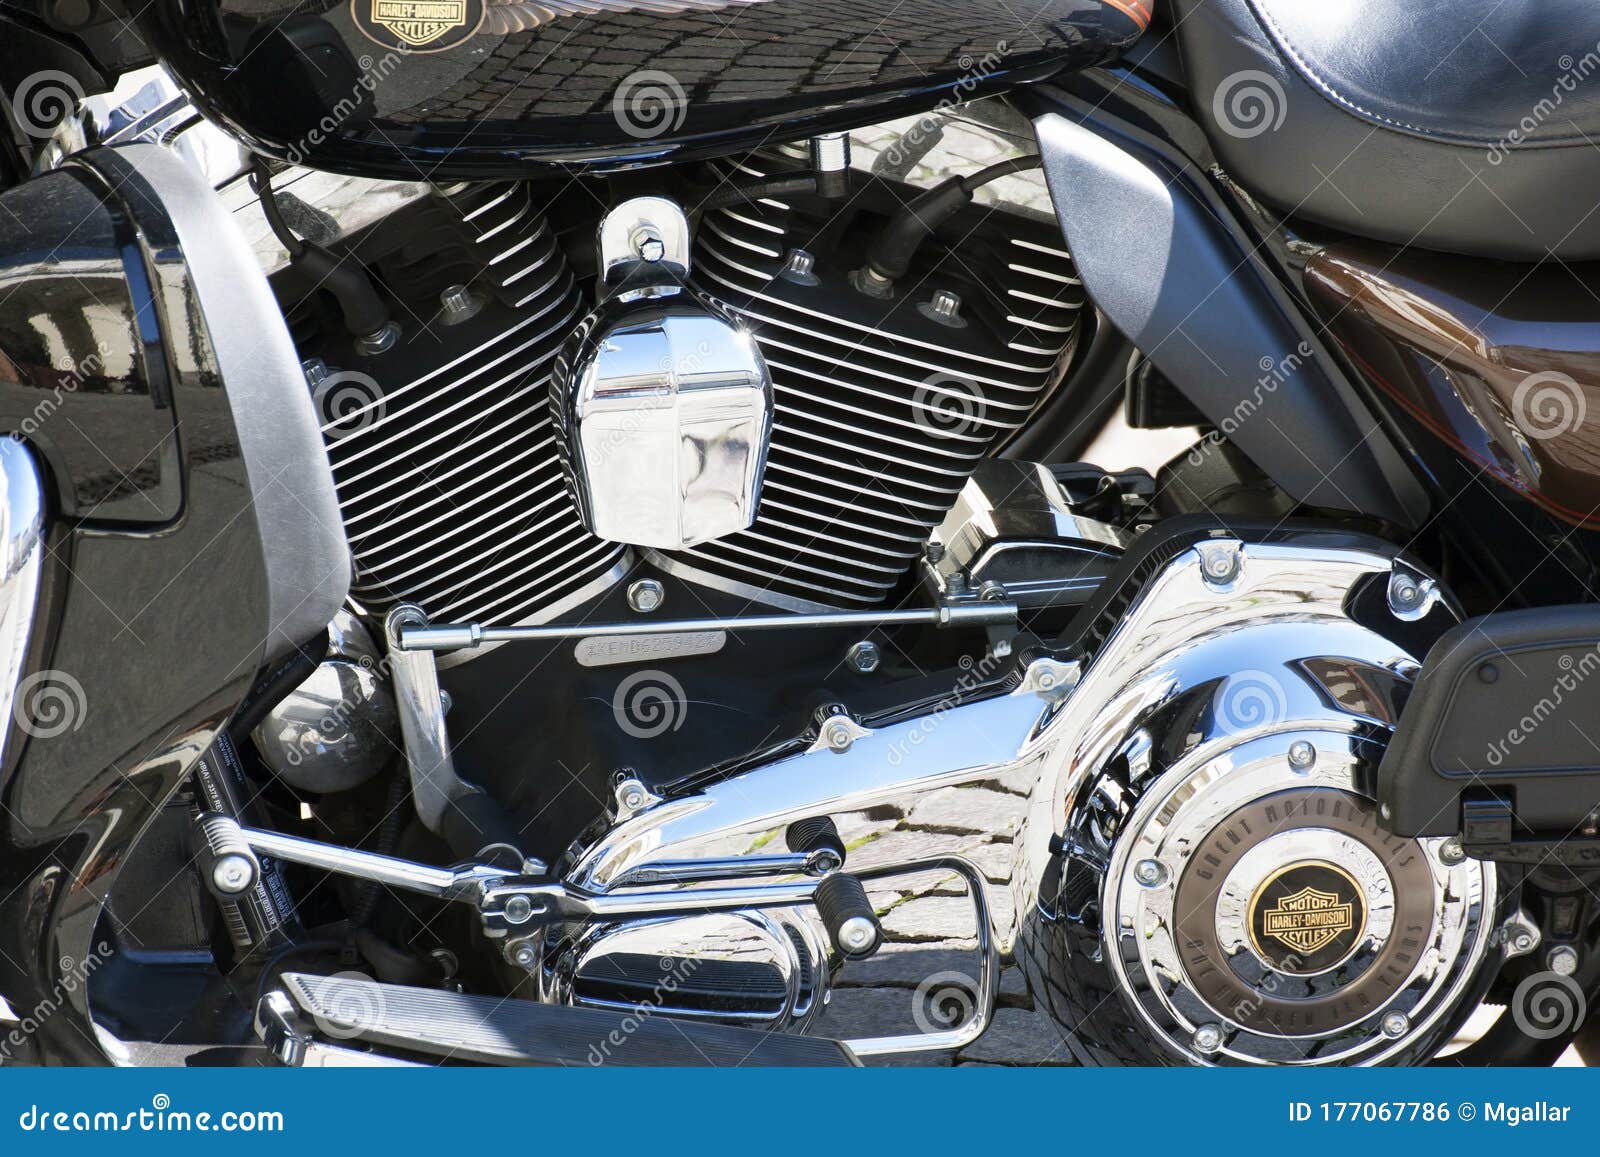 7 895 Engine Harley Photos Free Royalty Free Stock Photos From Dreamstime